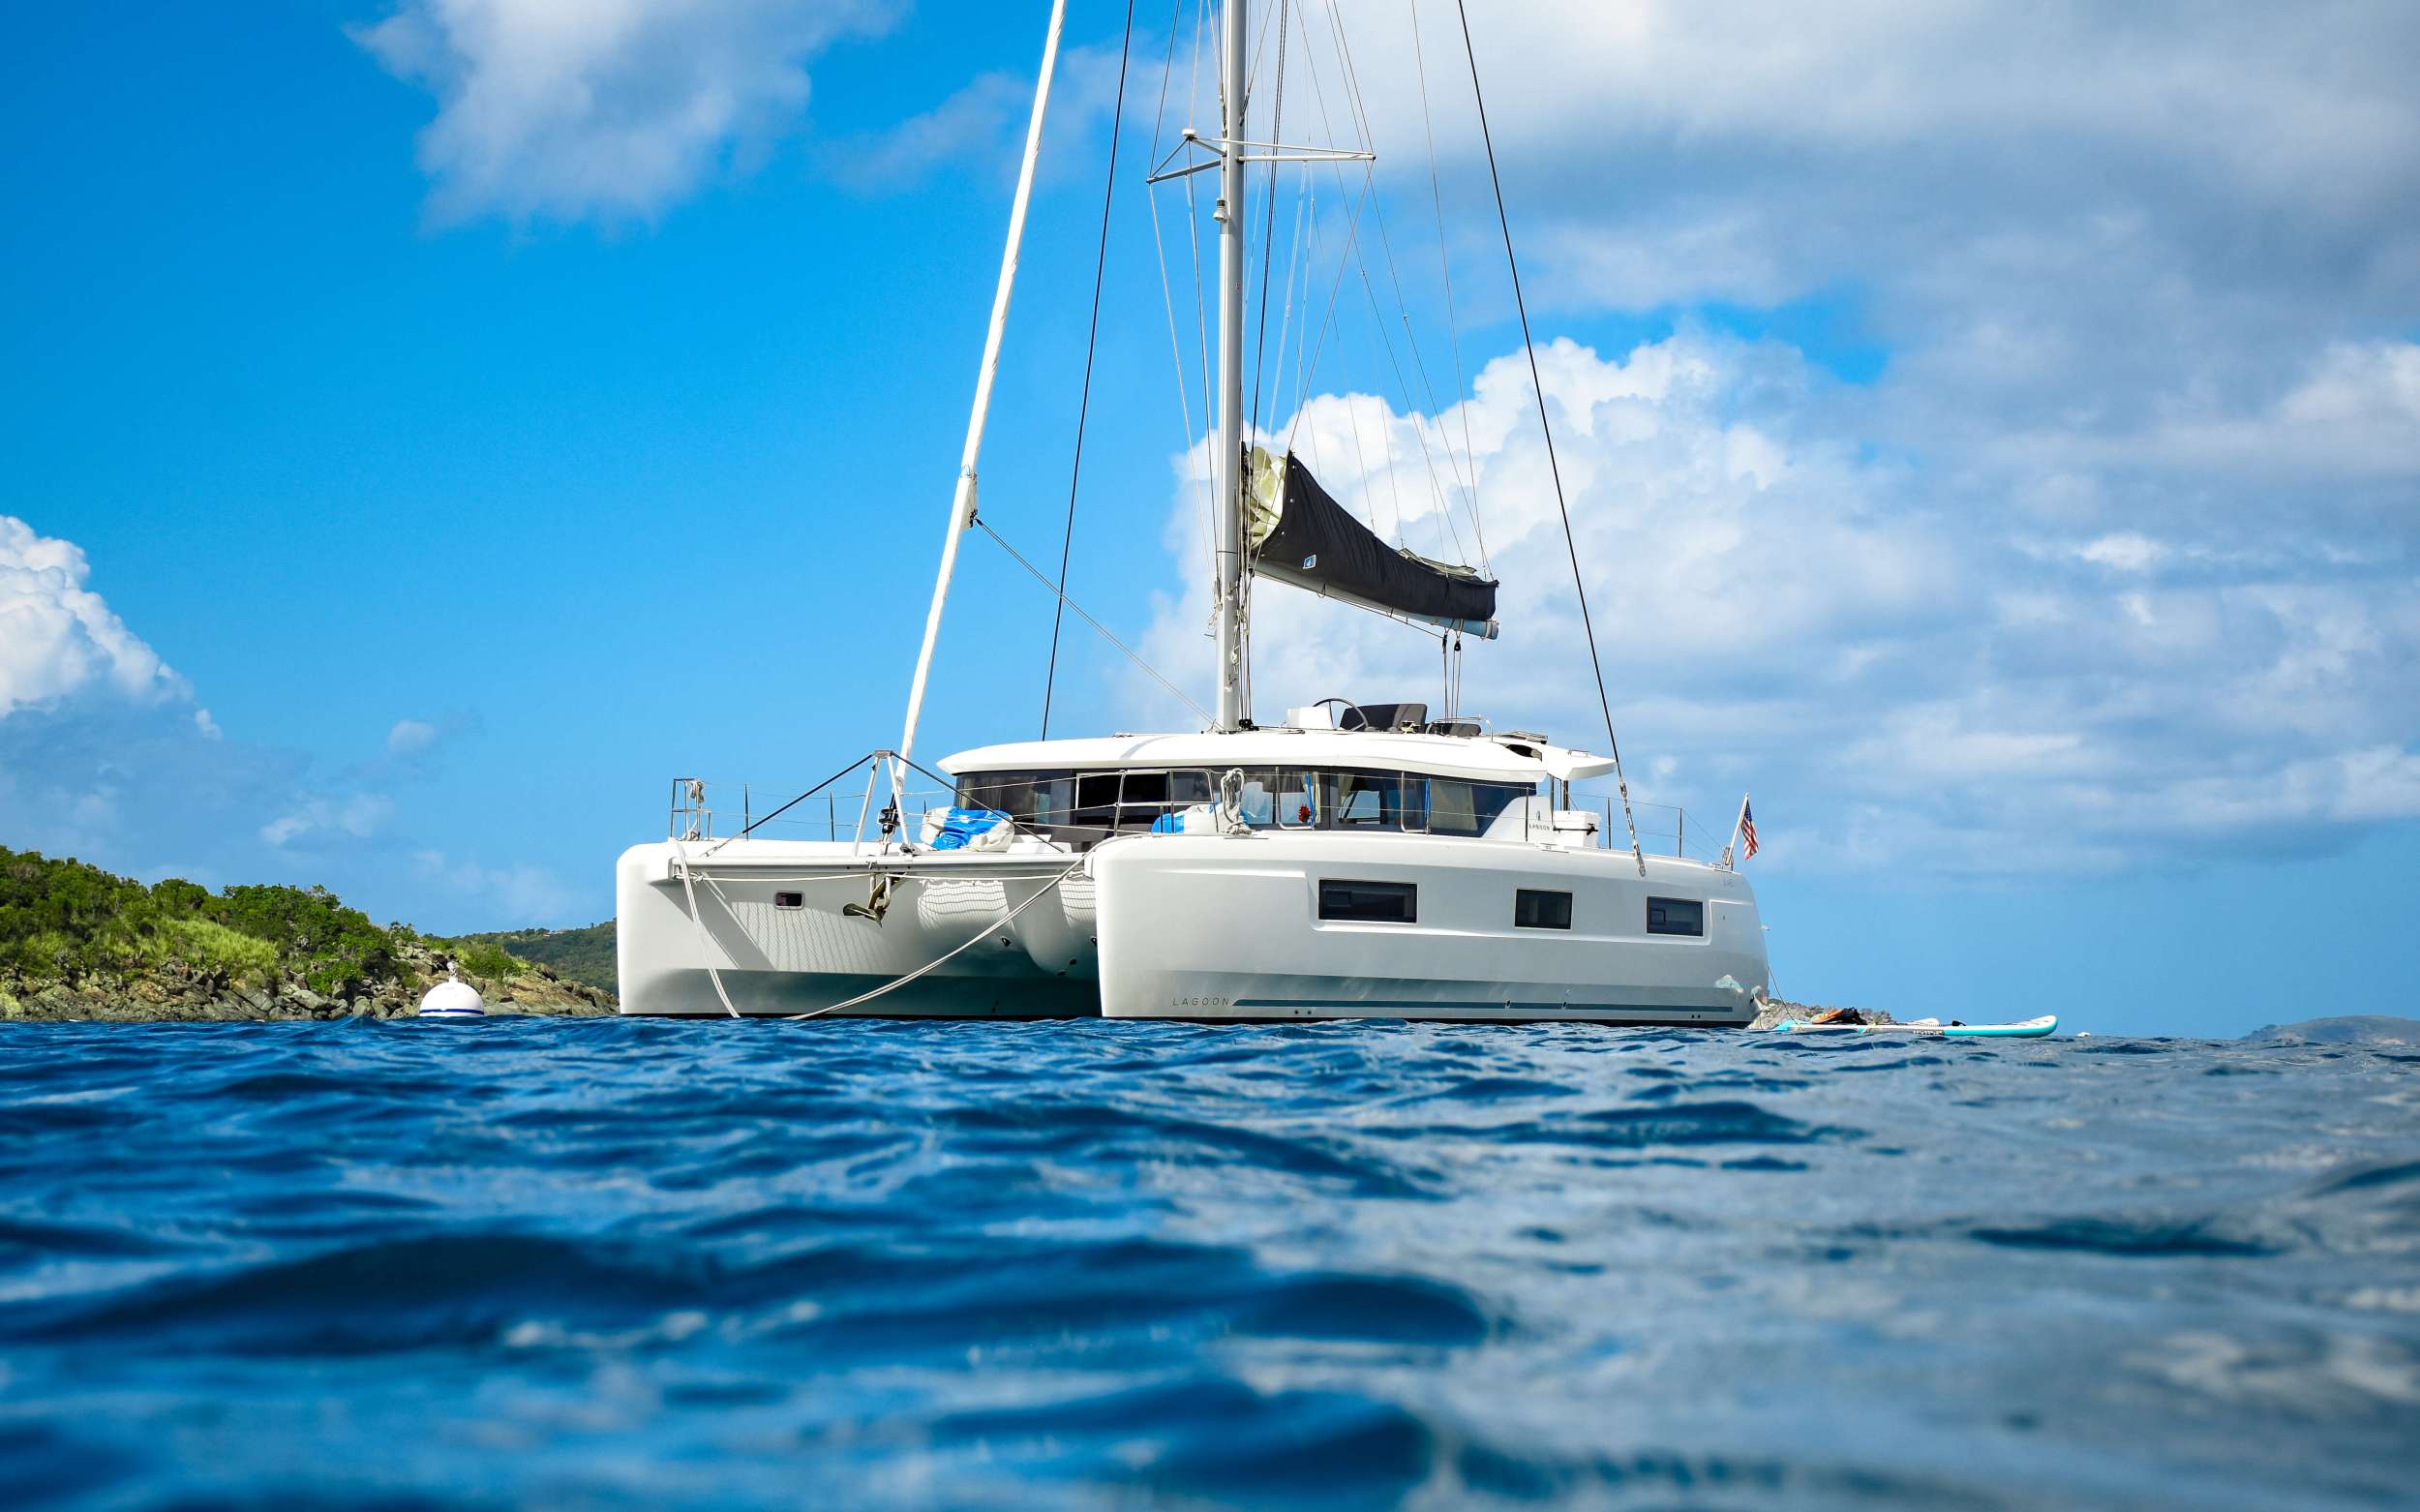 CELAVIE - Luxury yacht charter Antigua and Barbuda & Boat hire in Caribbean 2